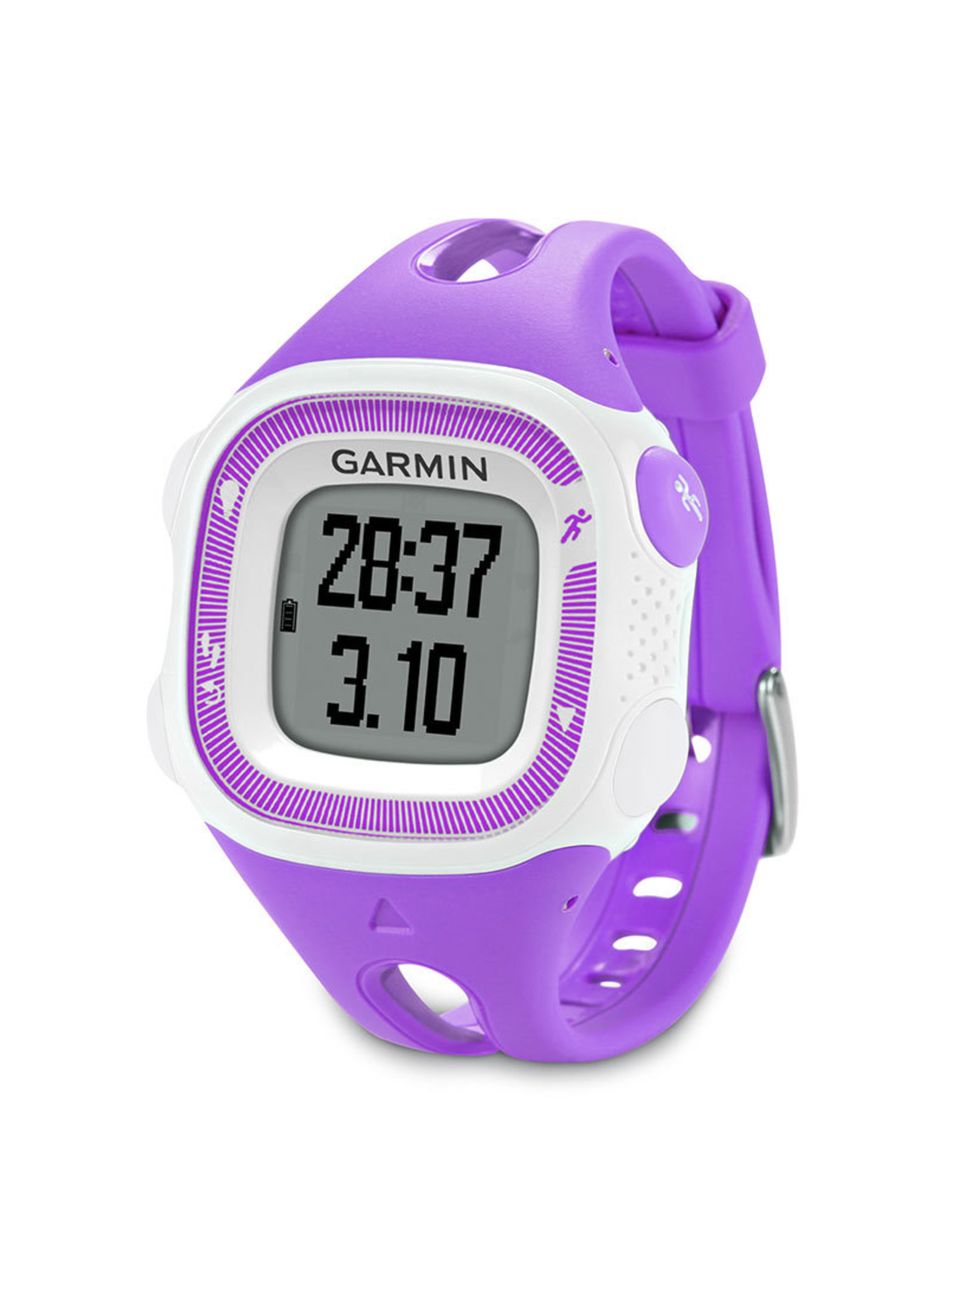 <p><a href="https://buy.garmin.com/en-GB/GB/watches-wearable-technology/wearables/forerunner-15/prod145621.html" target="_blank">Forerunner 15 £119.99</a></p>

<p>All runners should have a GPS watch. This one is ultra user friendly and reliable giving you